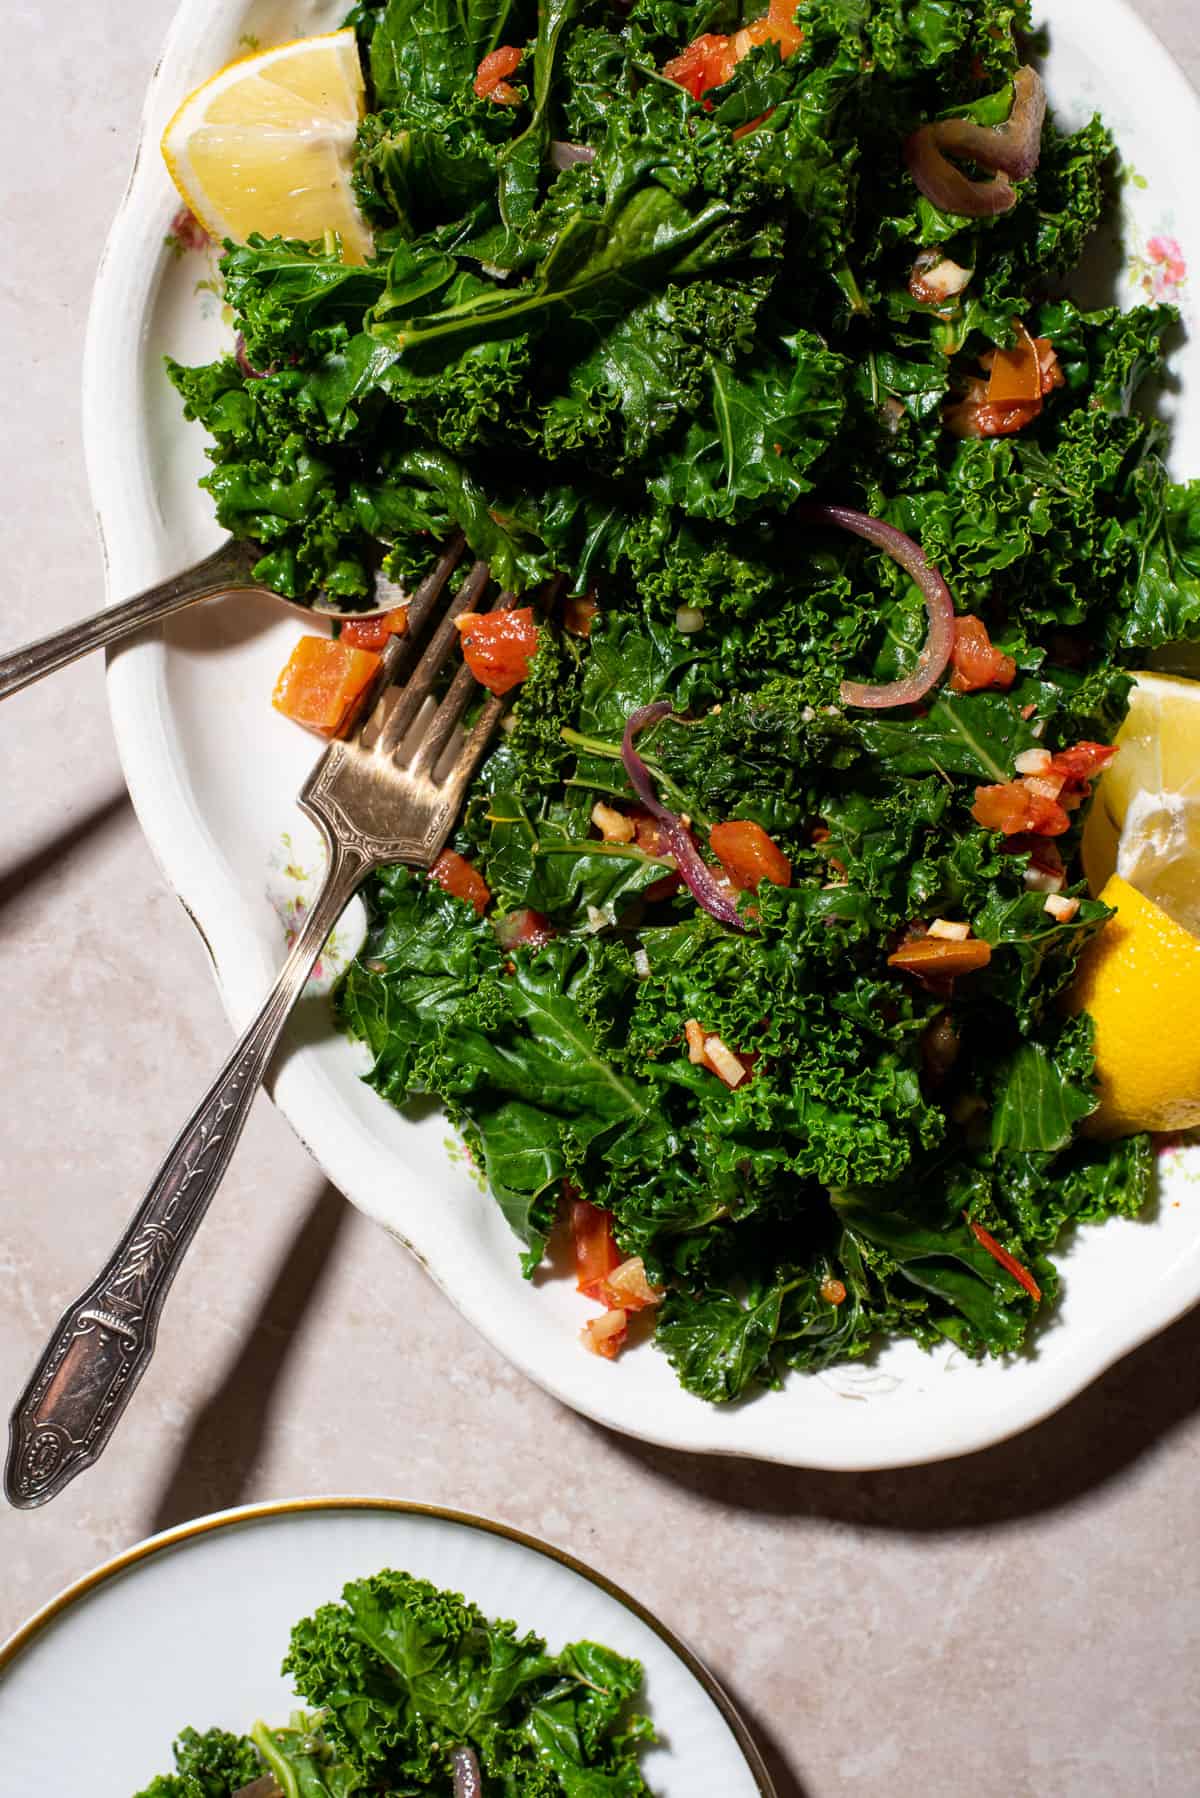 Lemon garlic kale with tomatoes and red onion.